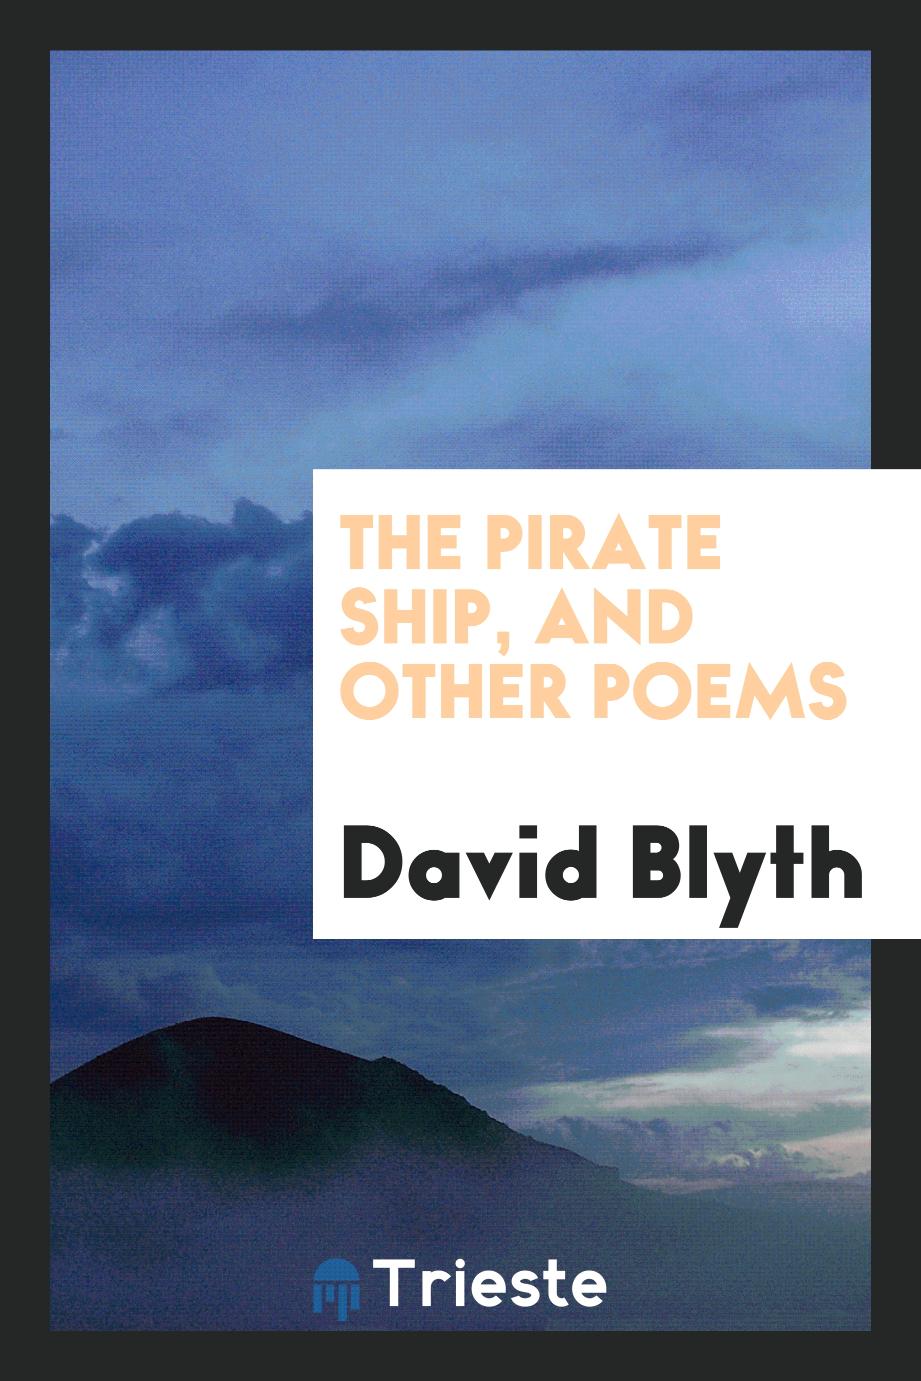 The Pirate Ship, and Other Poems